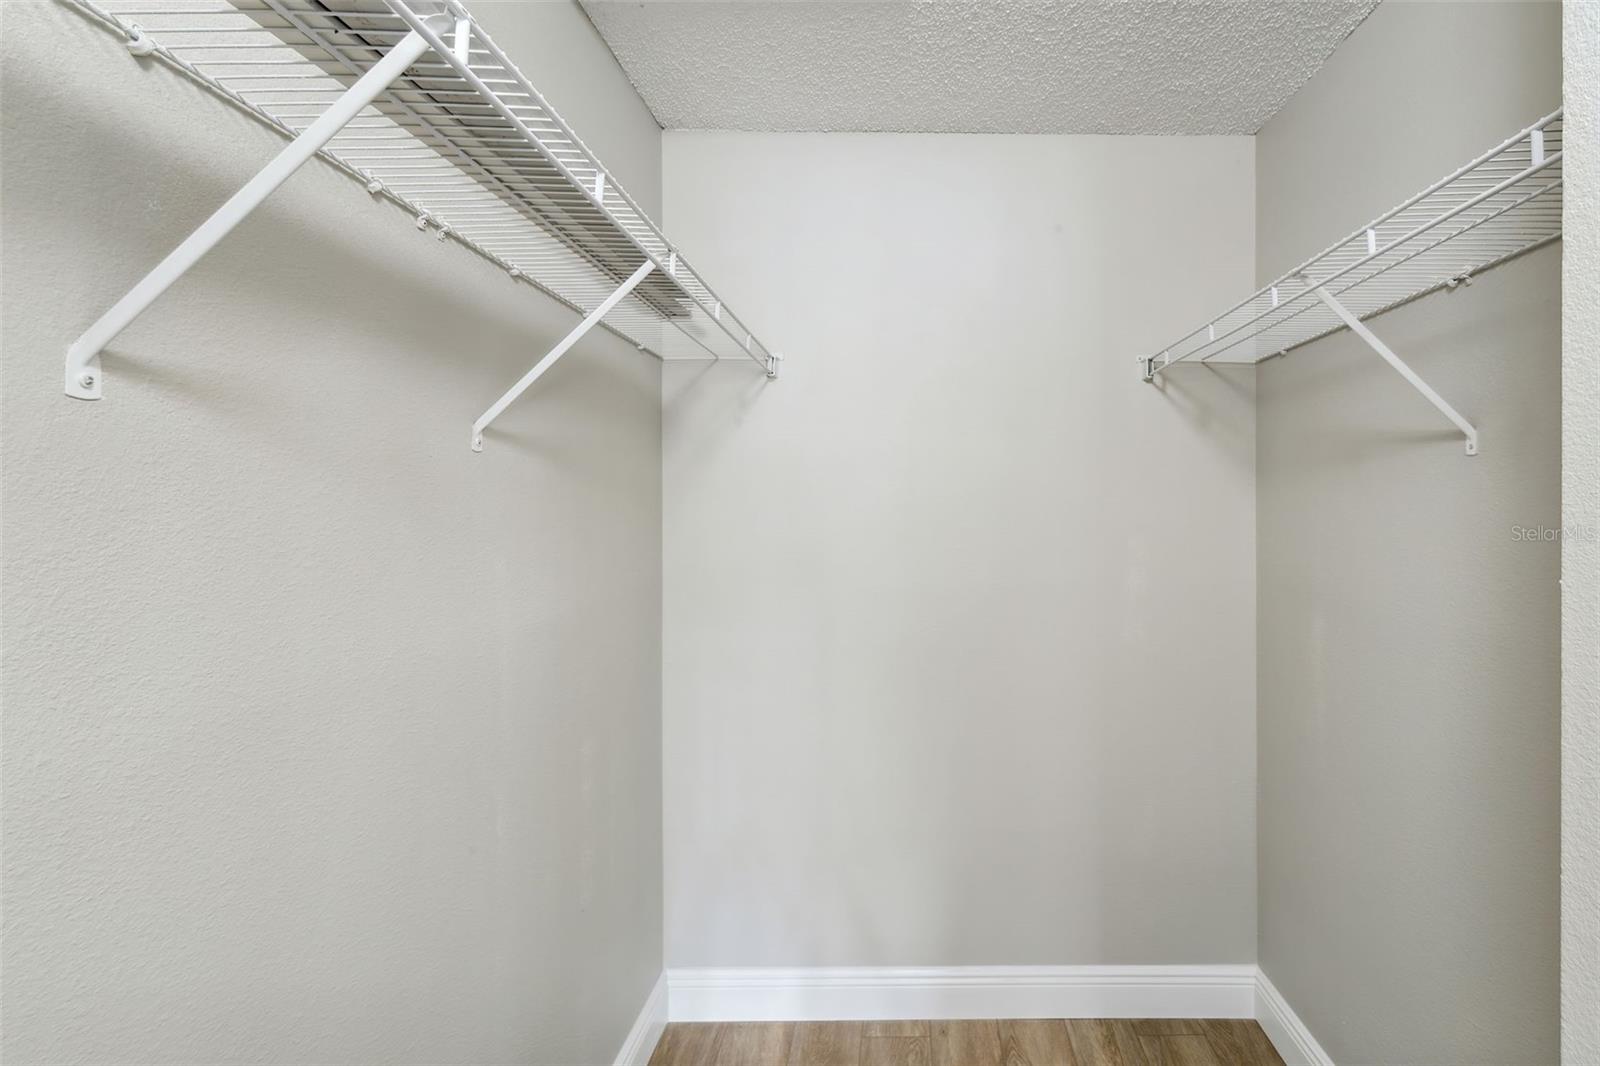 Walk in closet and lots of storage space.